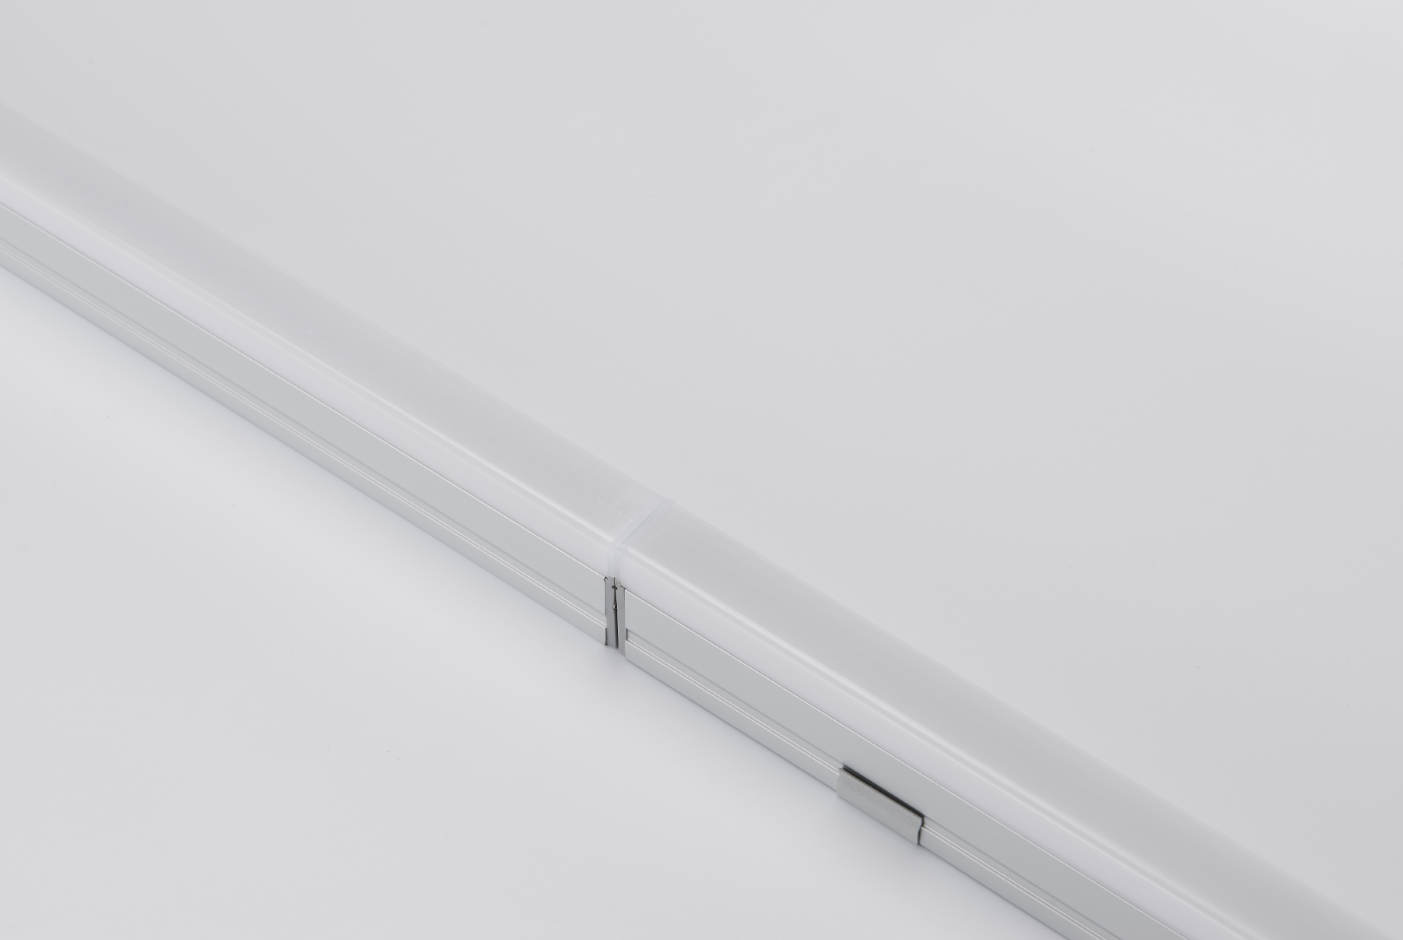 RH-C26 12W Linear Architectural Lighting Systems Indoor and Outdoor for LED Strip Profile light